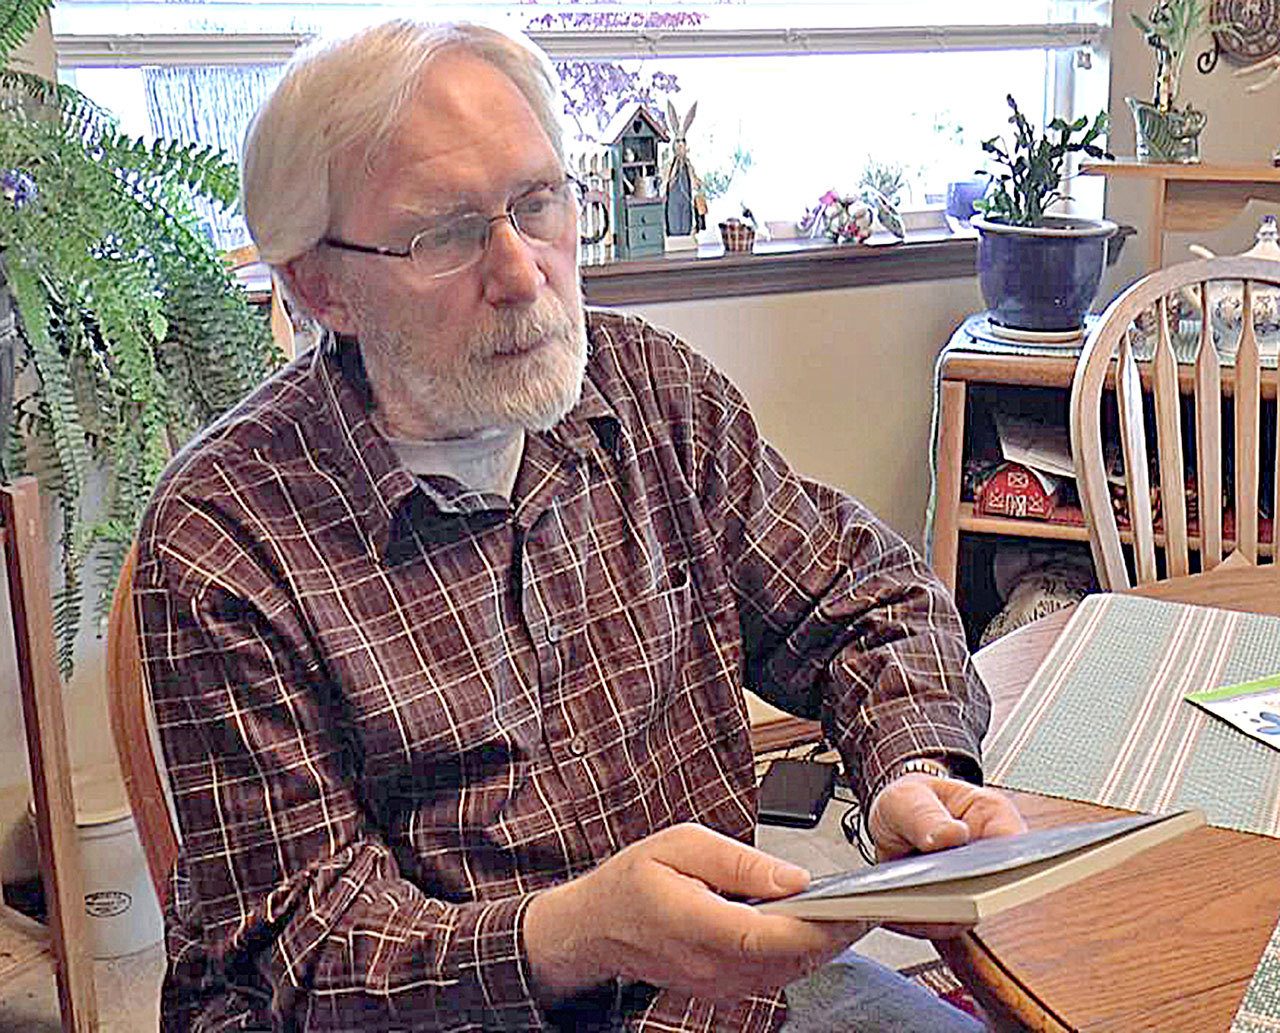 Poet Michael Daley, seen here, will share tales and insights about his literary adventures as a young writer and publisher in Port Townsend during the 1970s and 80s during tonight’s Jefferson County Historical Society’s First Friday Lecture. — Youtube.com